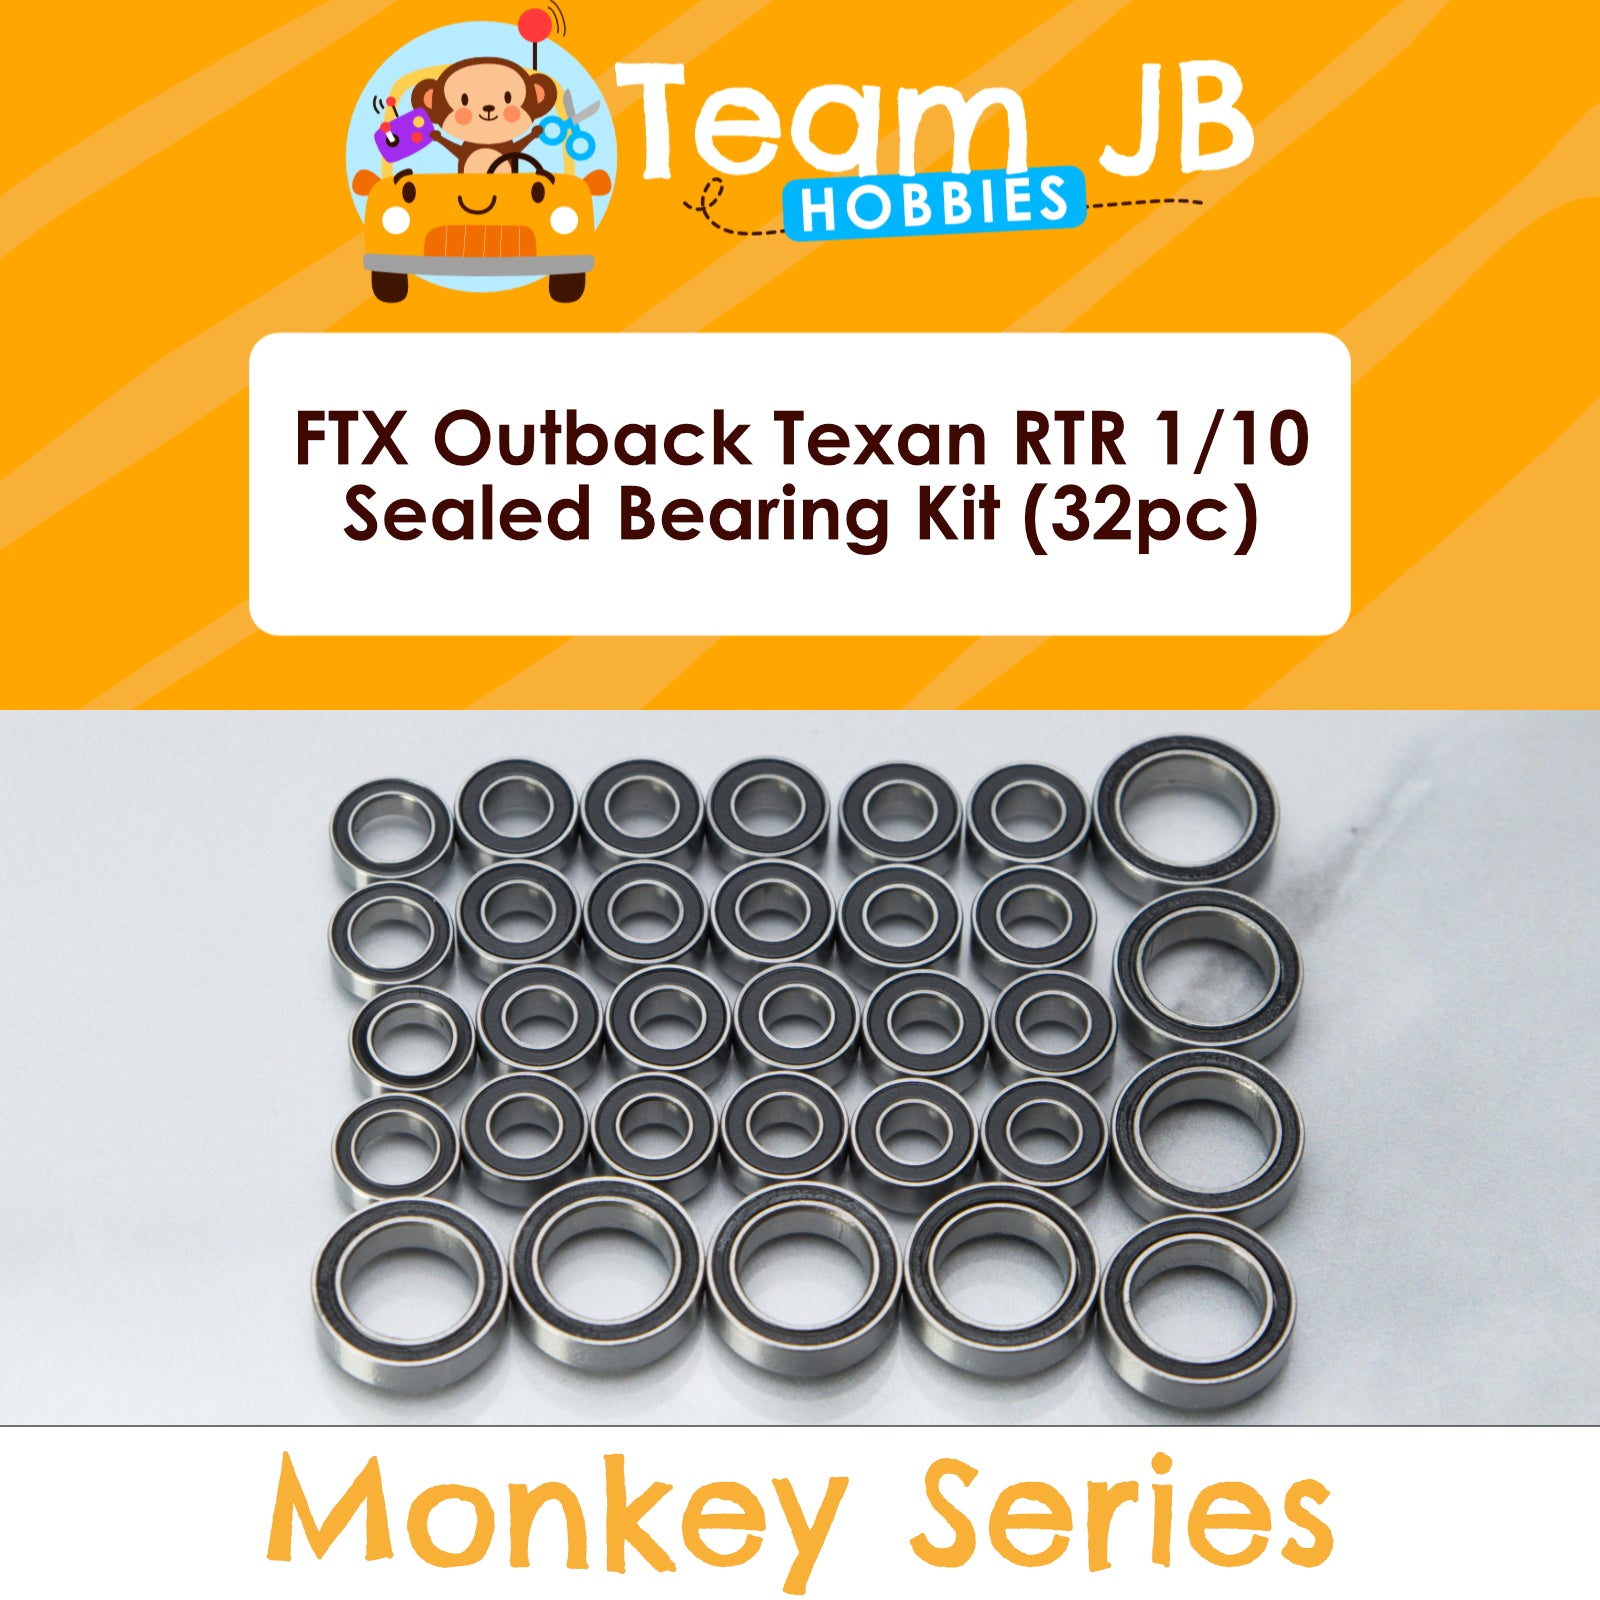 FTX Outback Texan RTR 1/10 - Sealed Bearing Kit